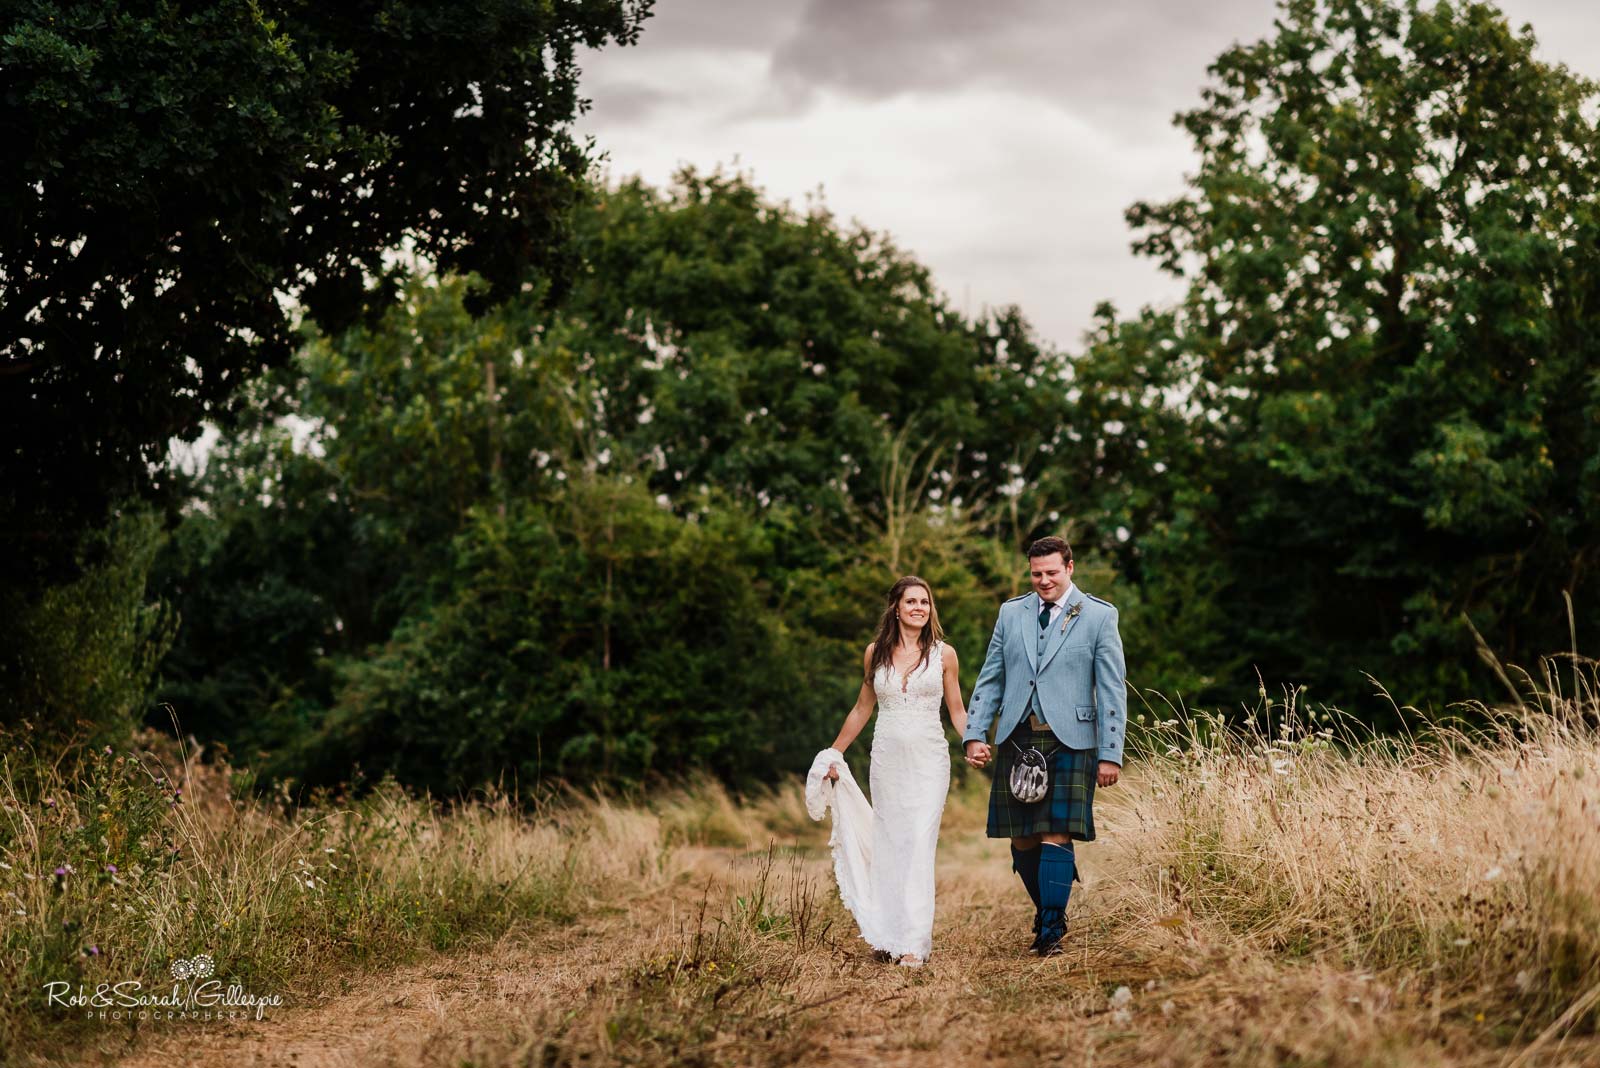 Bride and groom walking together at Wethele Manor